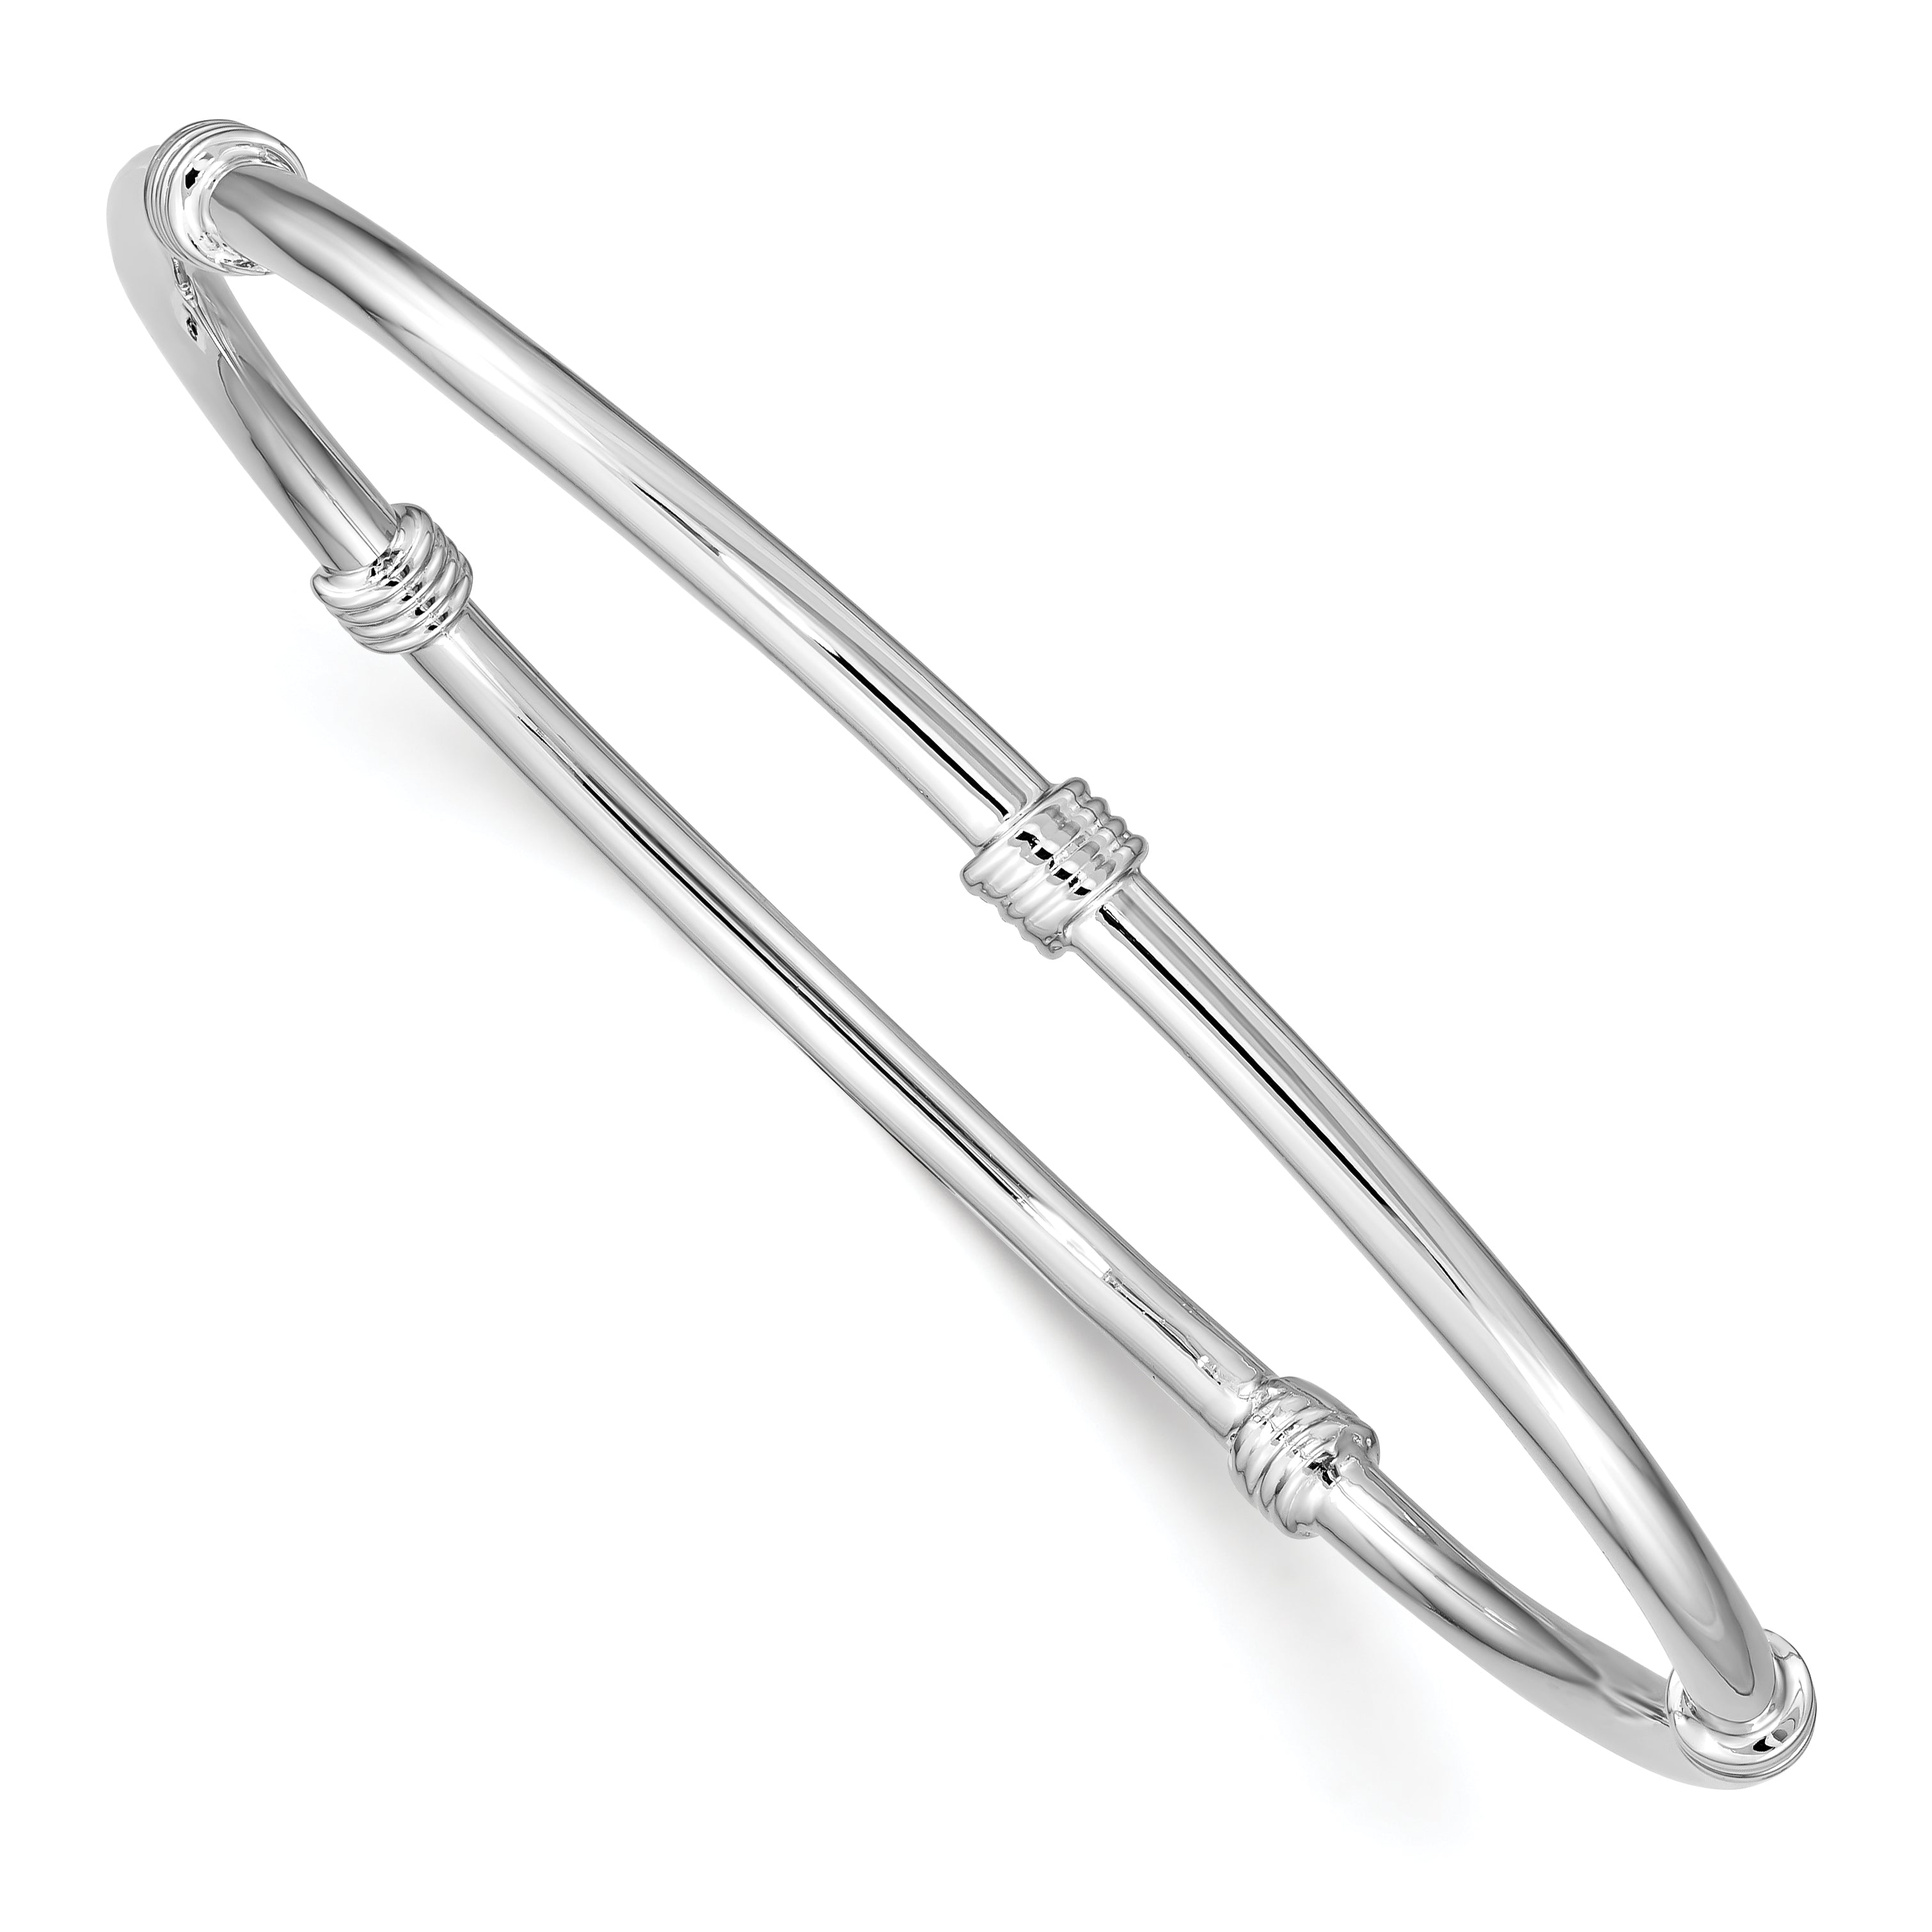 Sterling Silver Rhodium-plated Slip-on Bangle